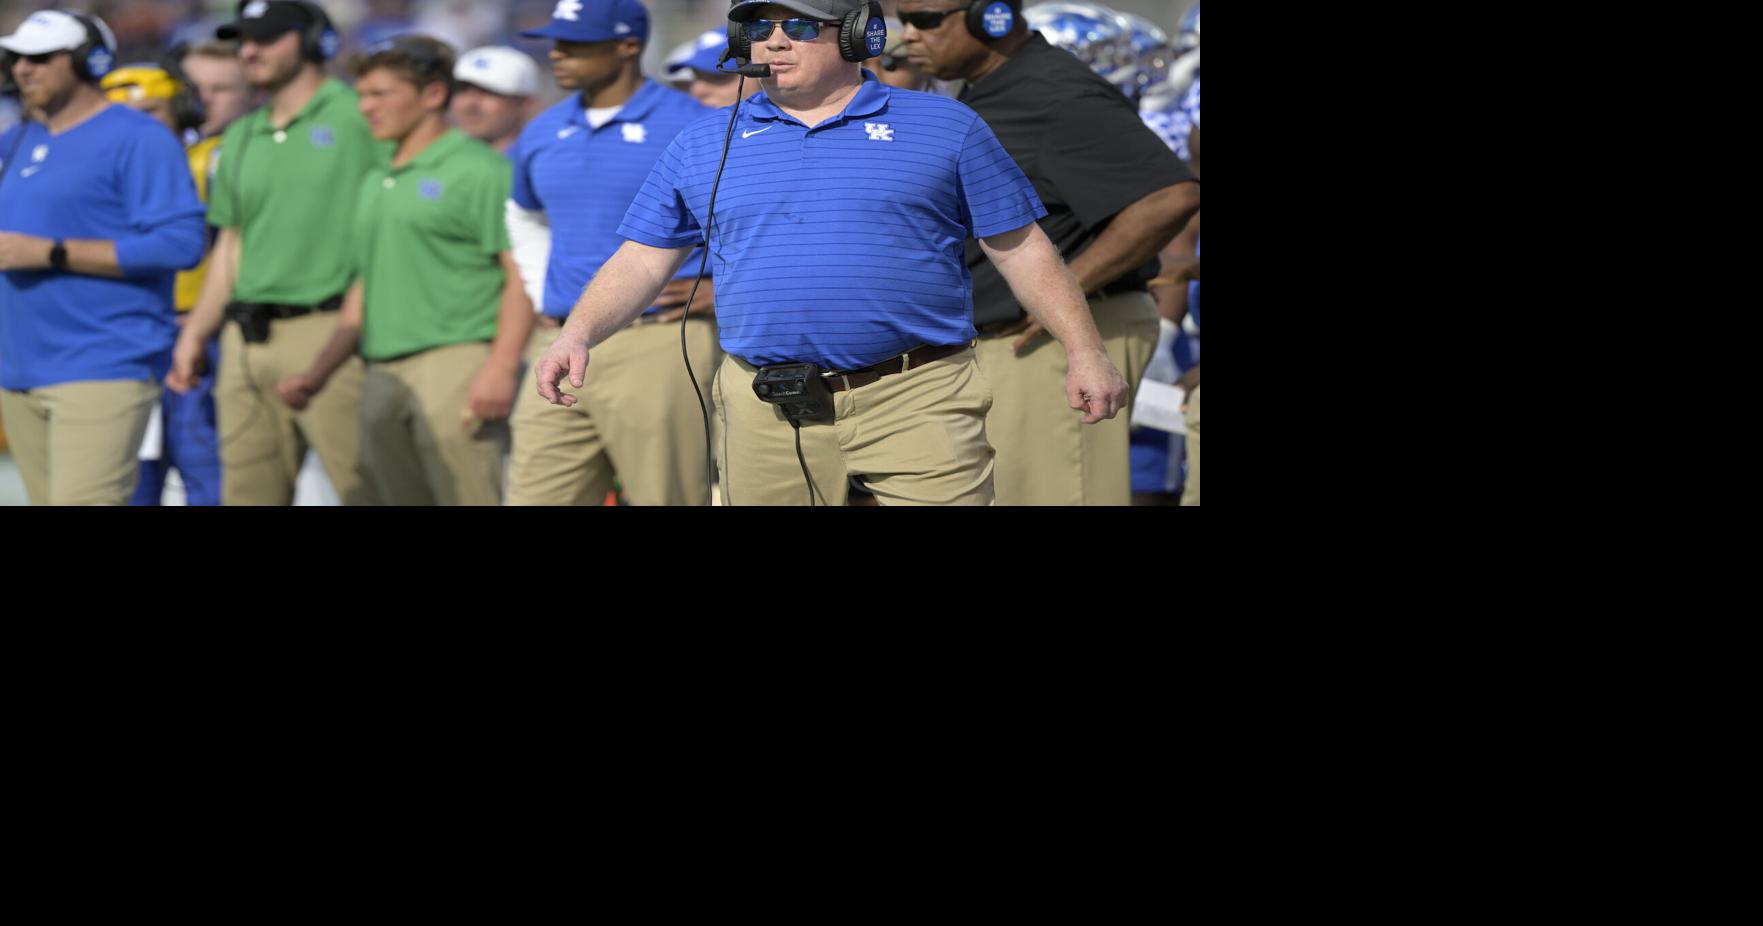 UK Coach Mark Stoops responds to 'basketball school' comments